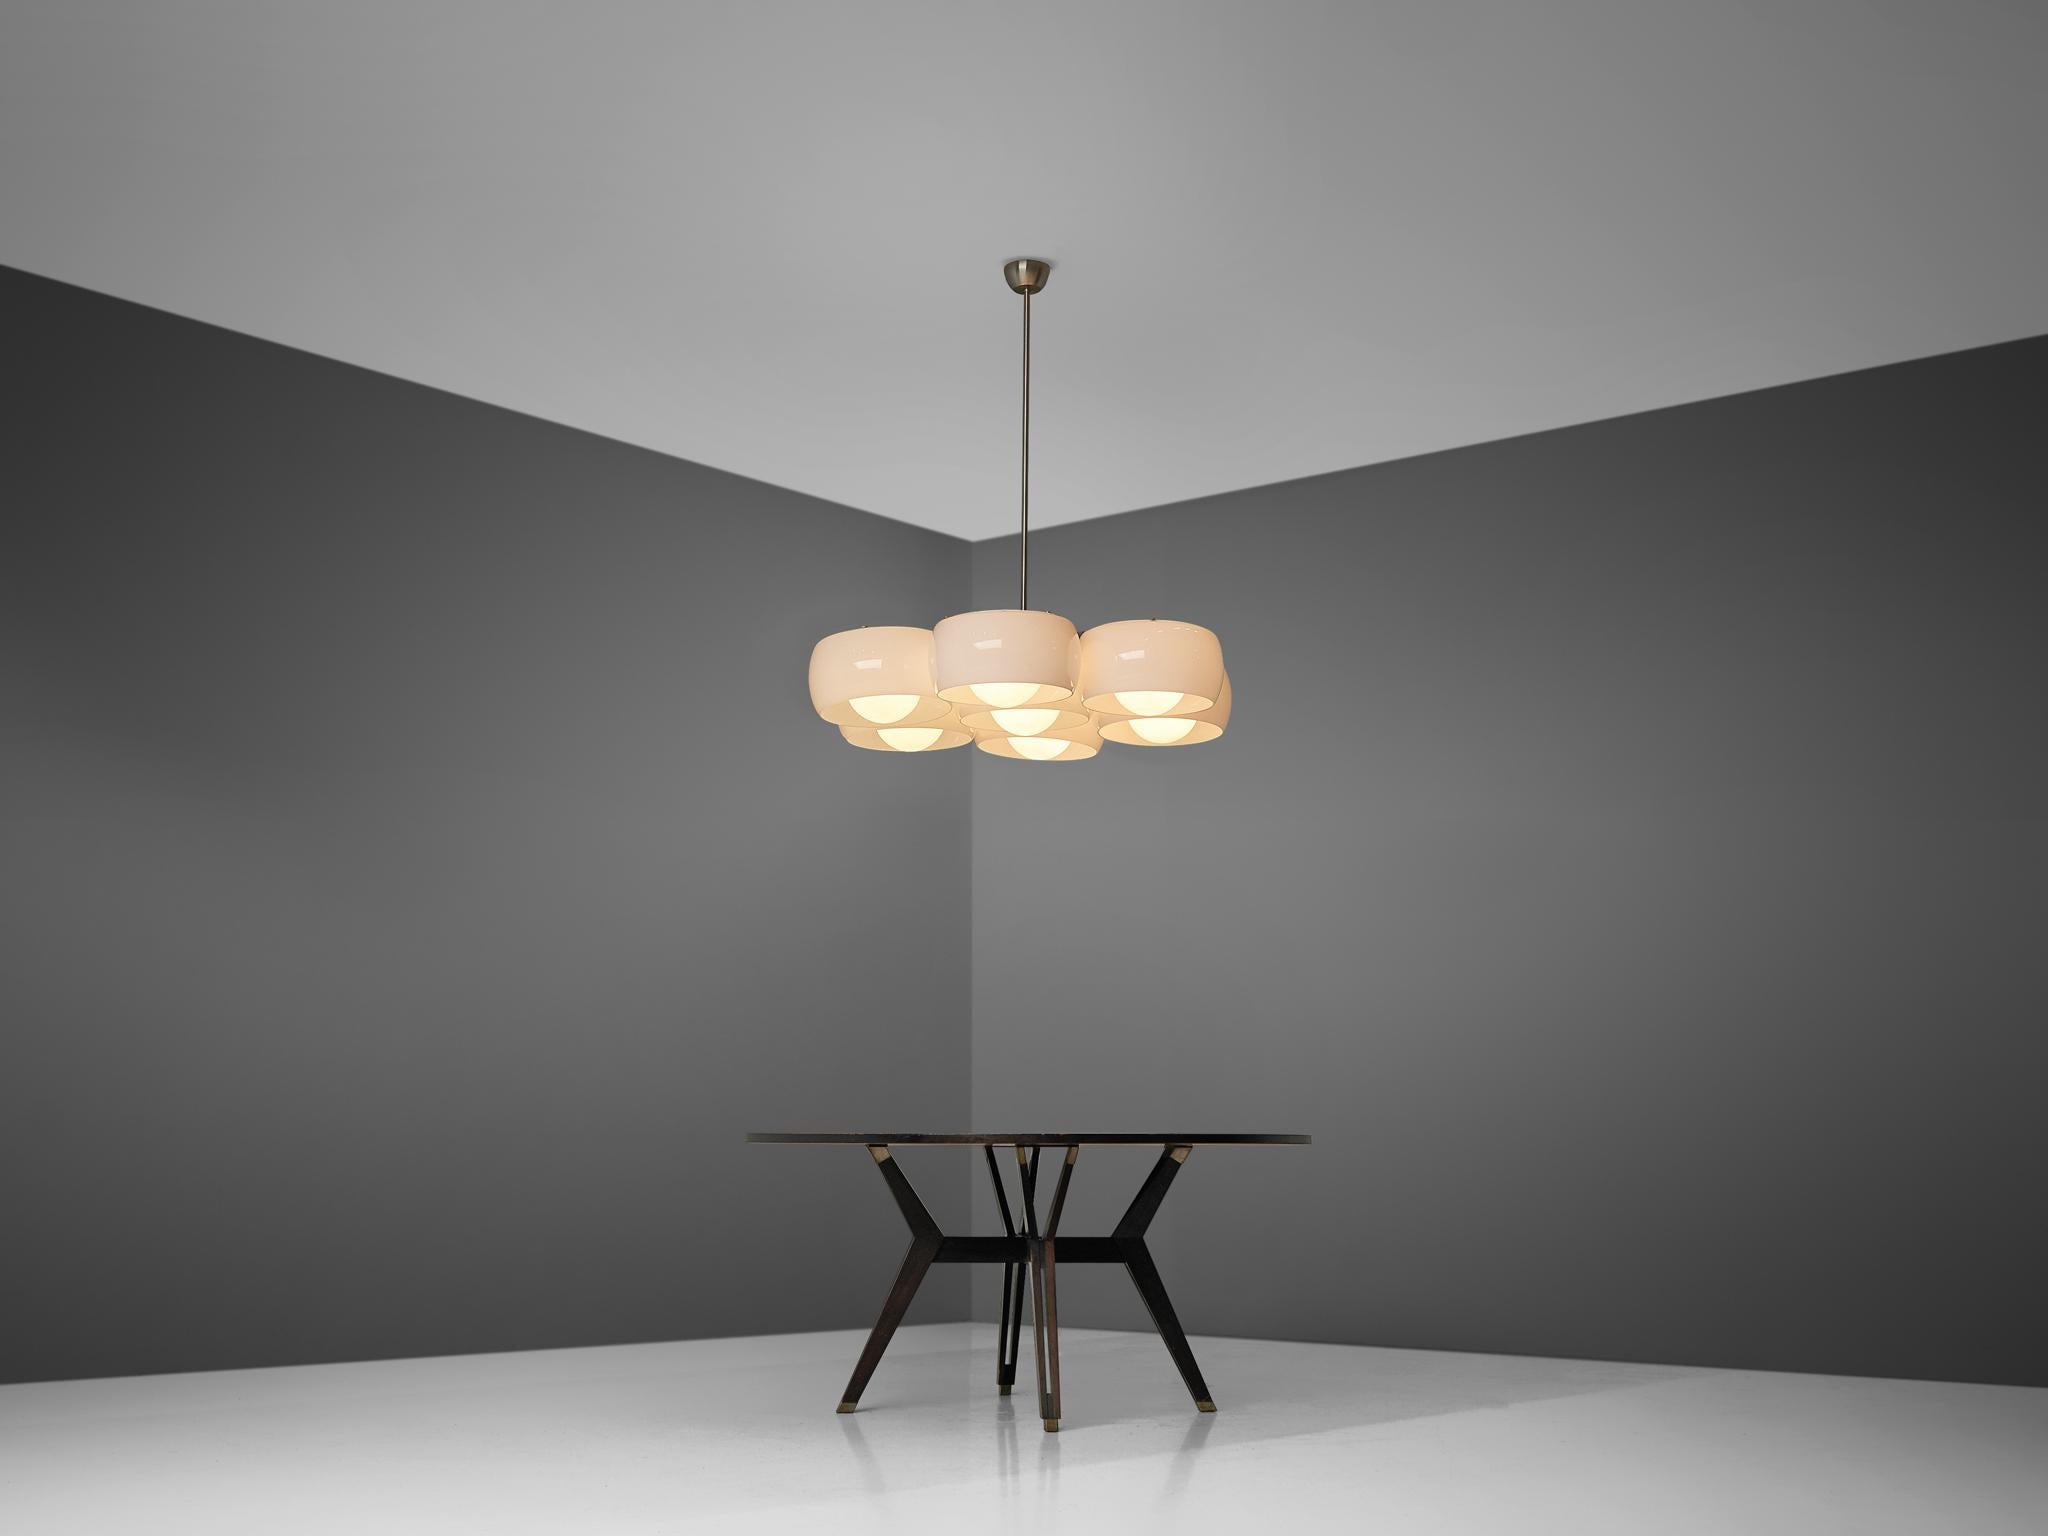 Listing for KNS: Vico Magistretti for Artemide Chandelier 'Eptaclinio' 3